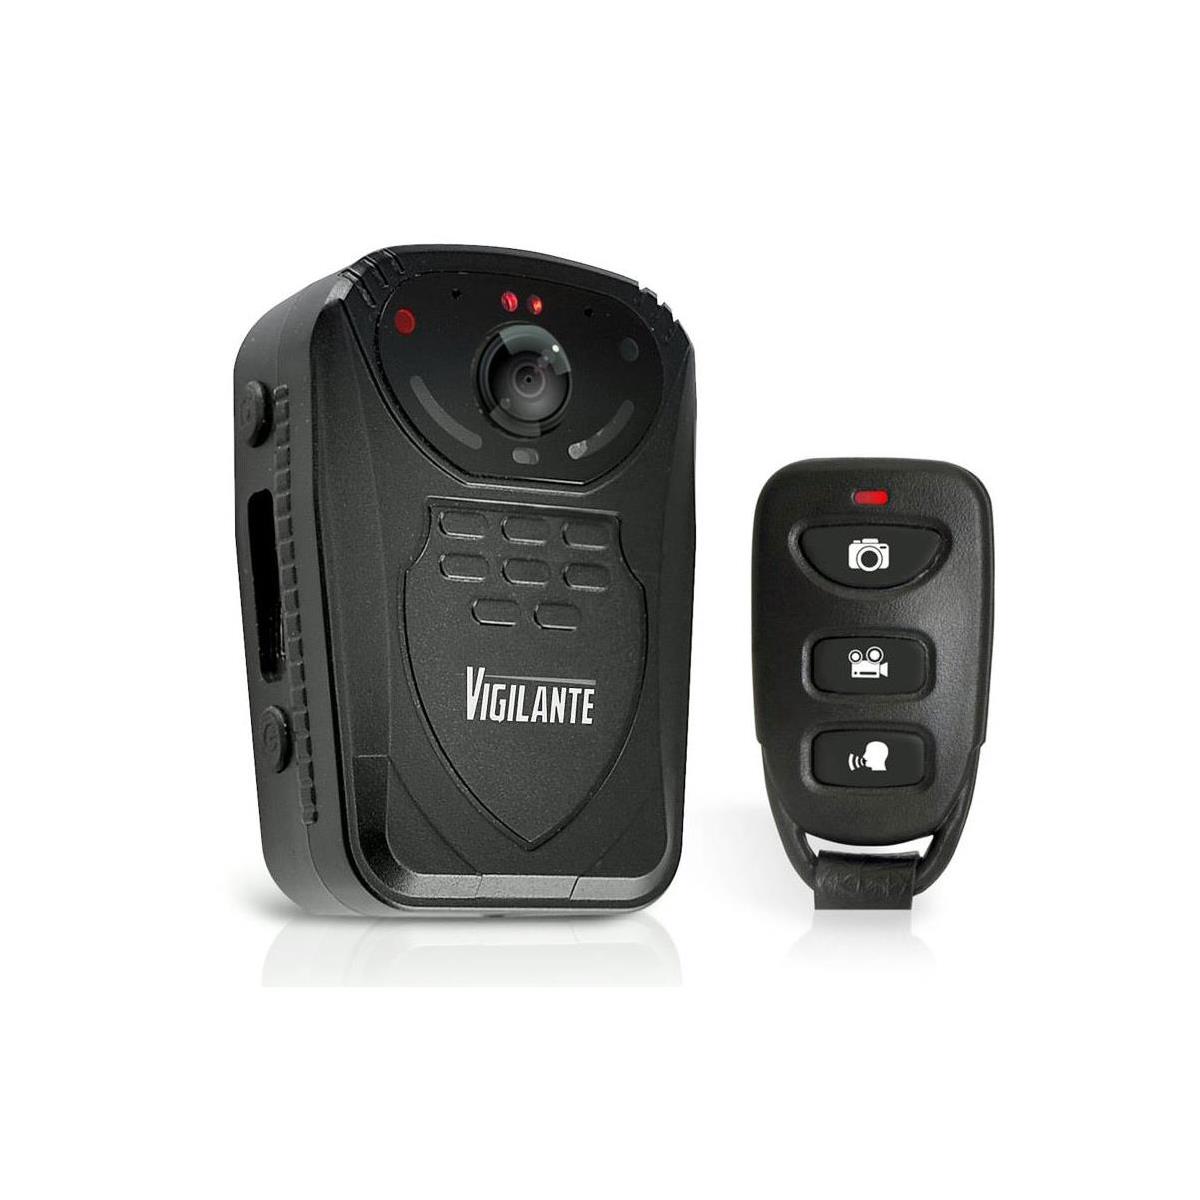 Image of Pyle PPBCM10 Vigilante Full HD Body Camera with Built-In 16GB Memory